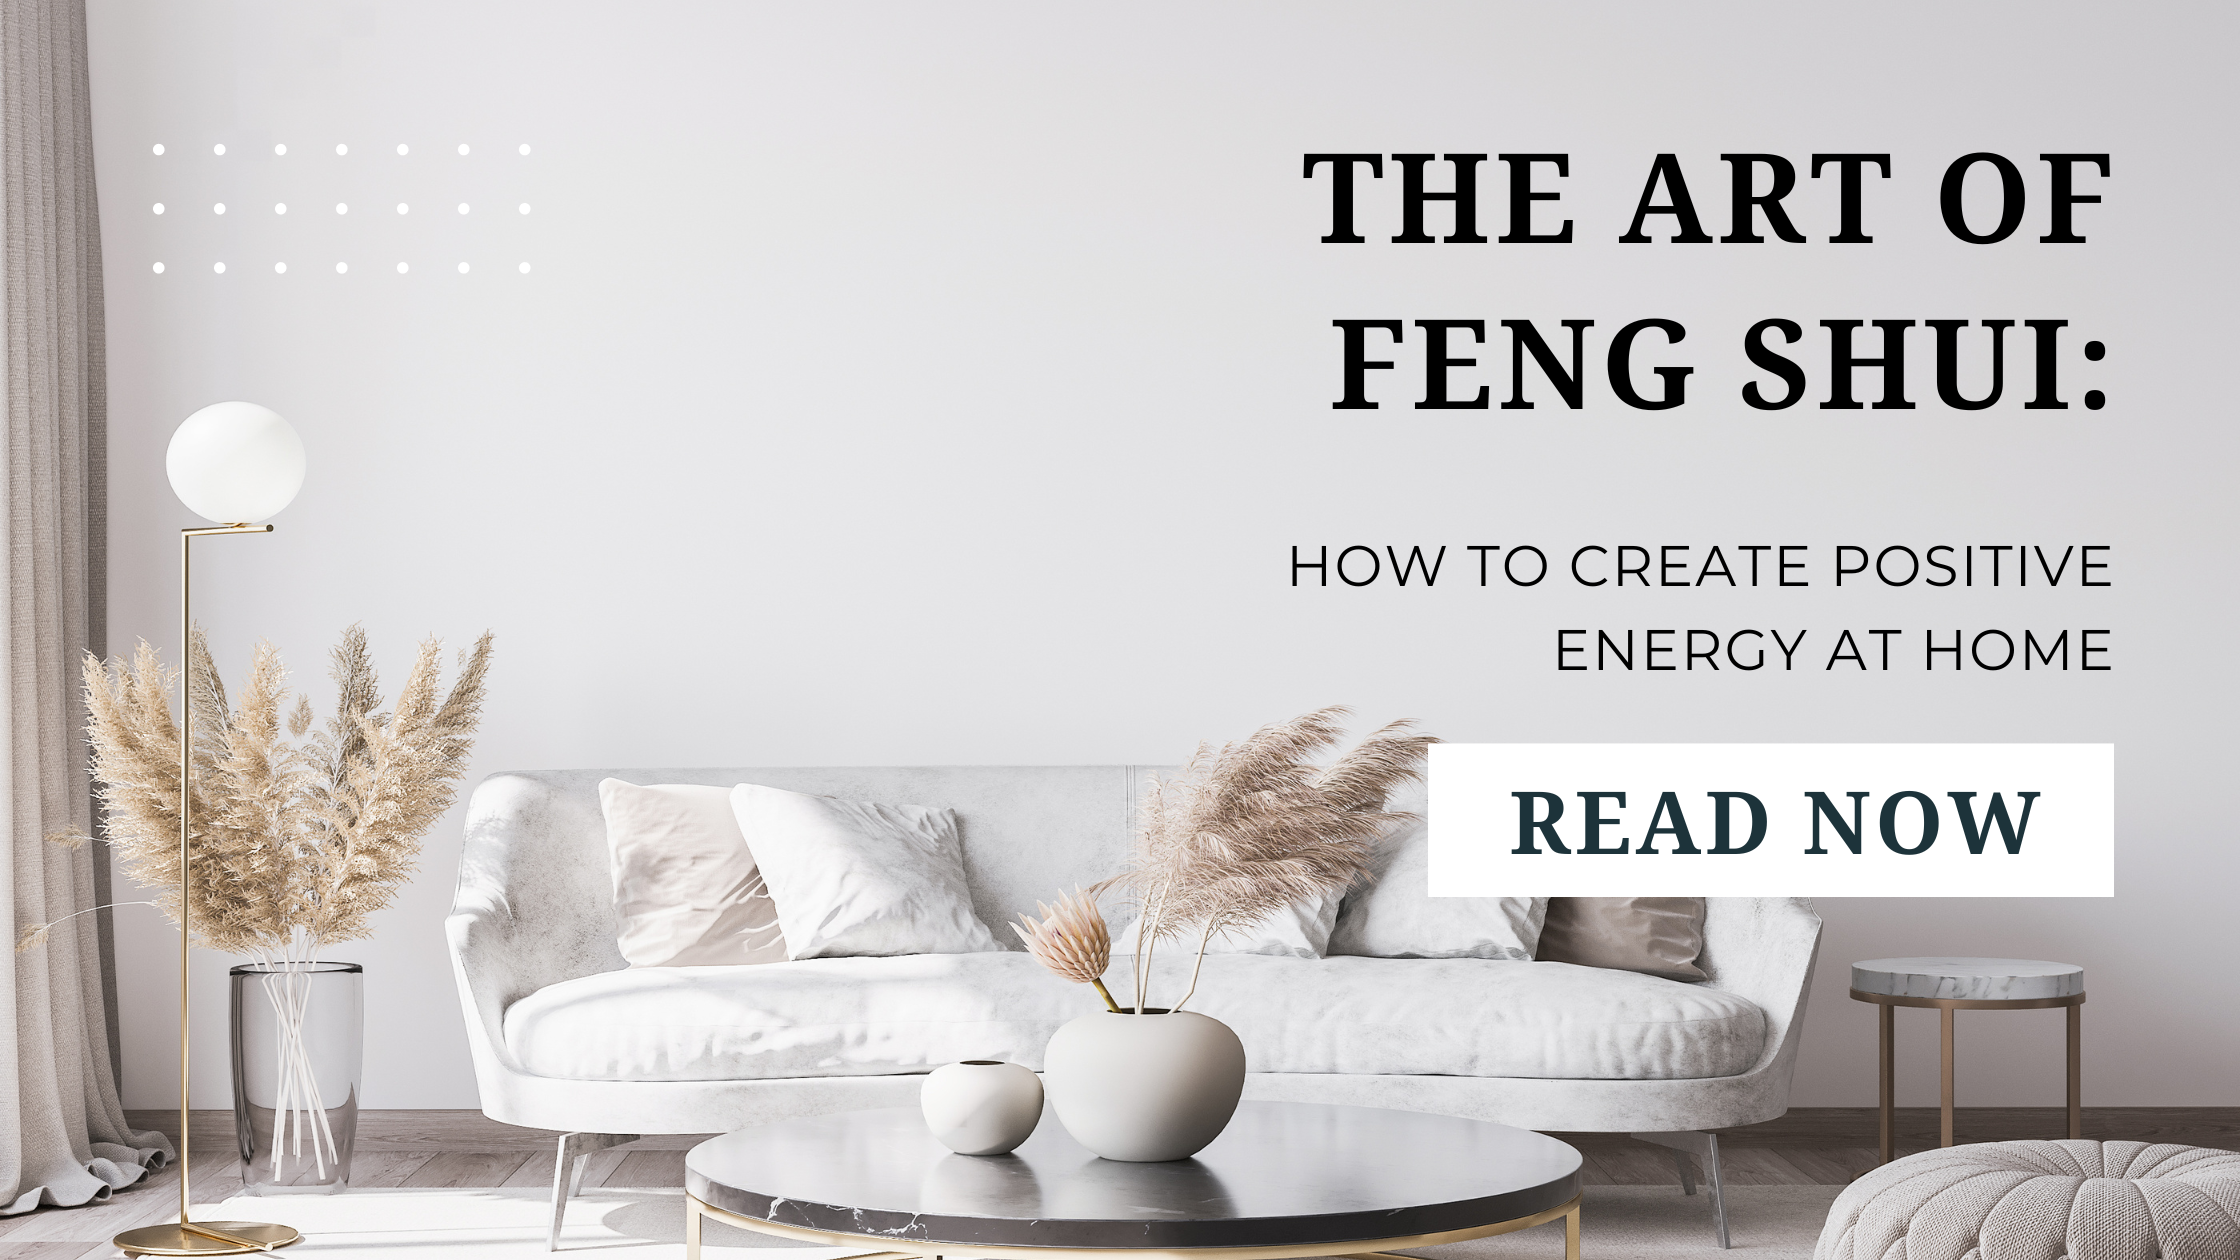 The Art of Feng Shui: How to Create Positive Energy at Home